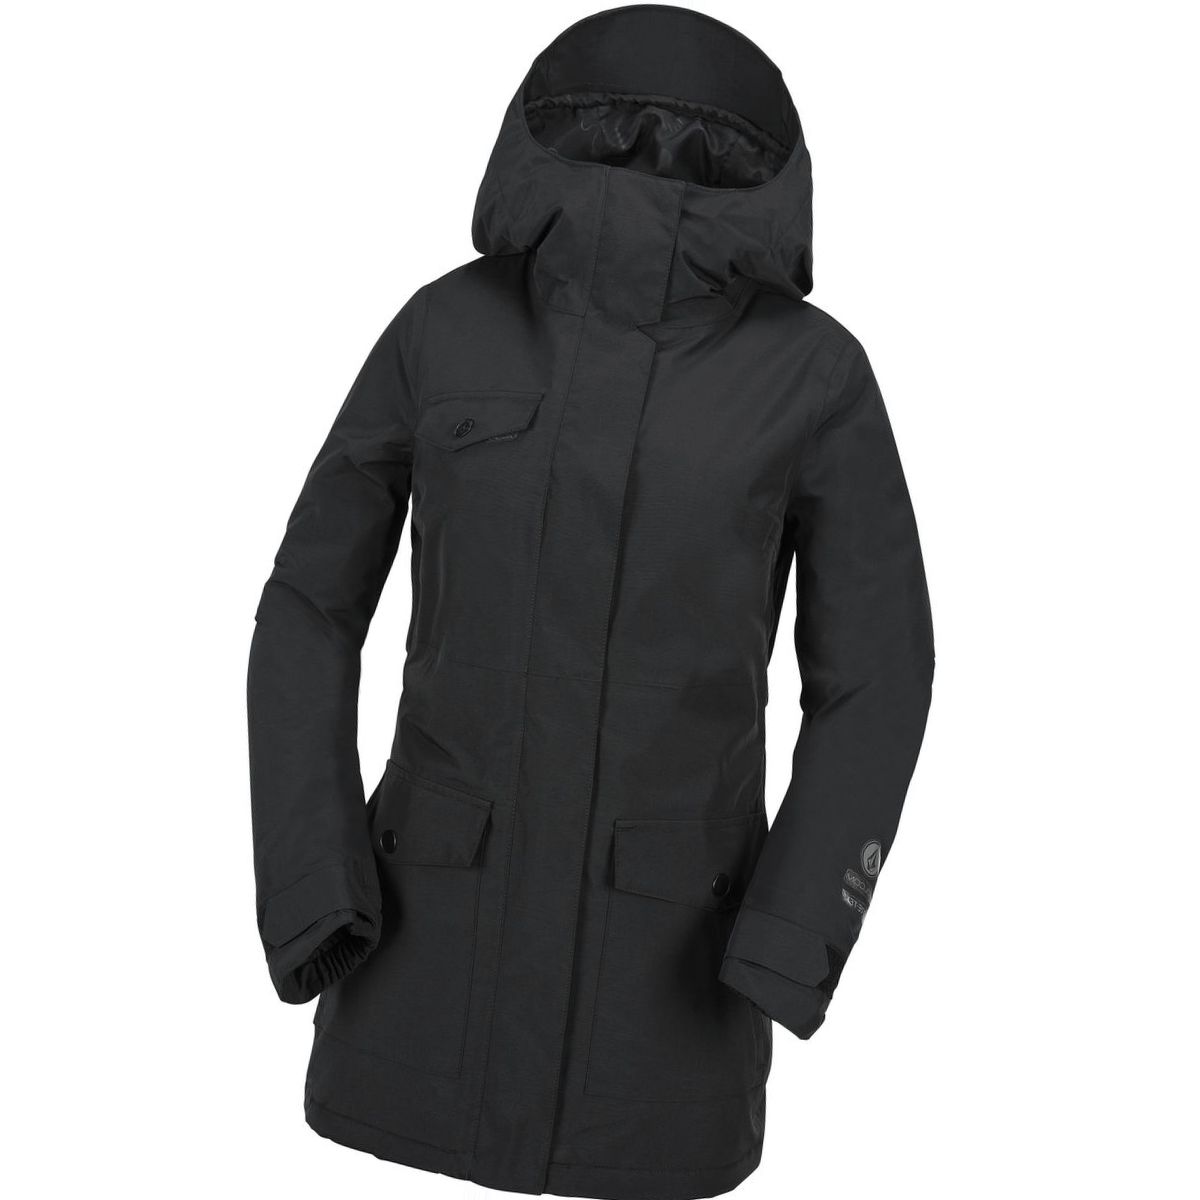 Volcom Bow Insulated Gore-Tex Jacket - Women's